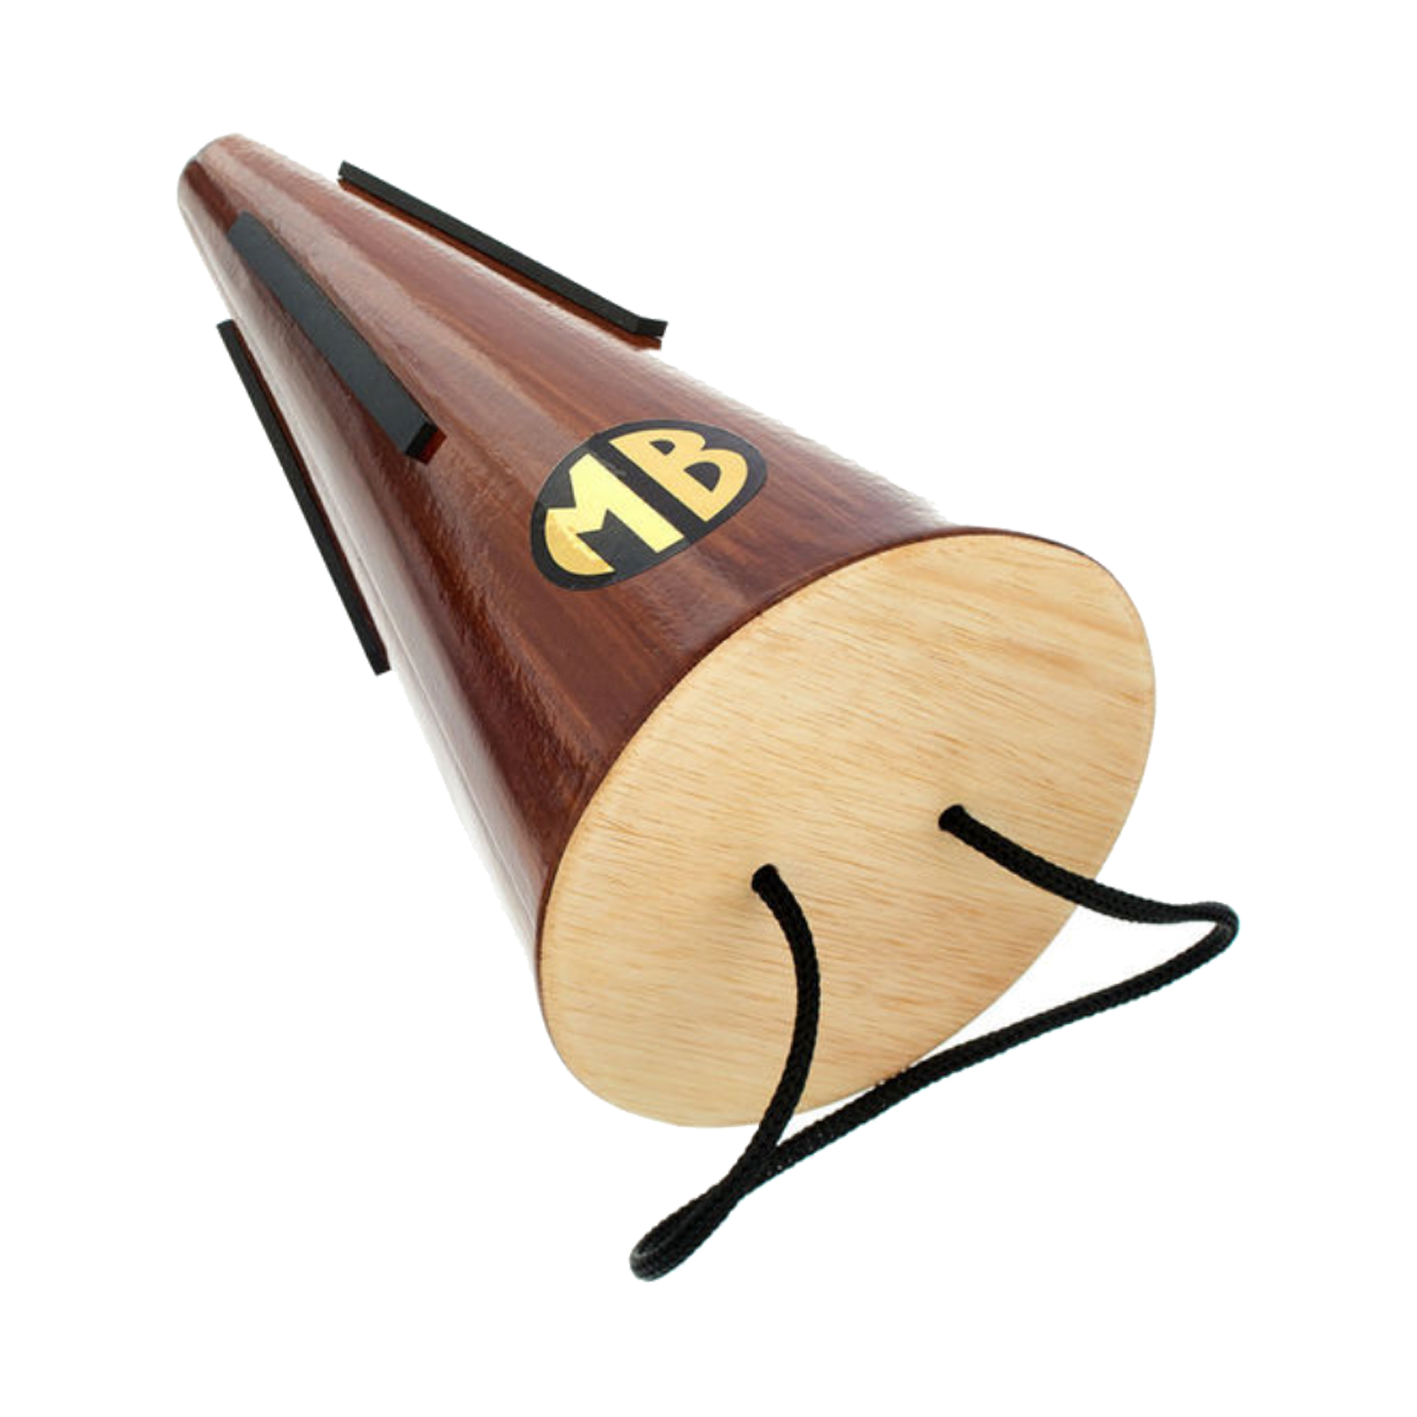 Marcus Bonna - Tunable Straight Mute for French Horn (Wood/Cardboard)-Mute-Marcus Bonna-Music Elements